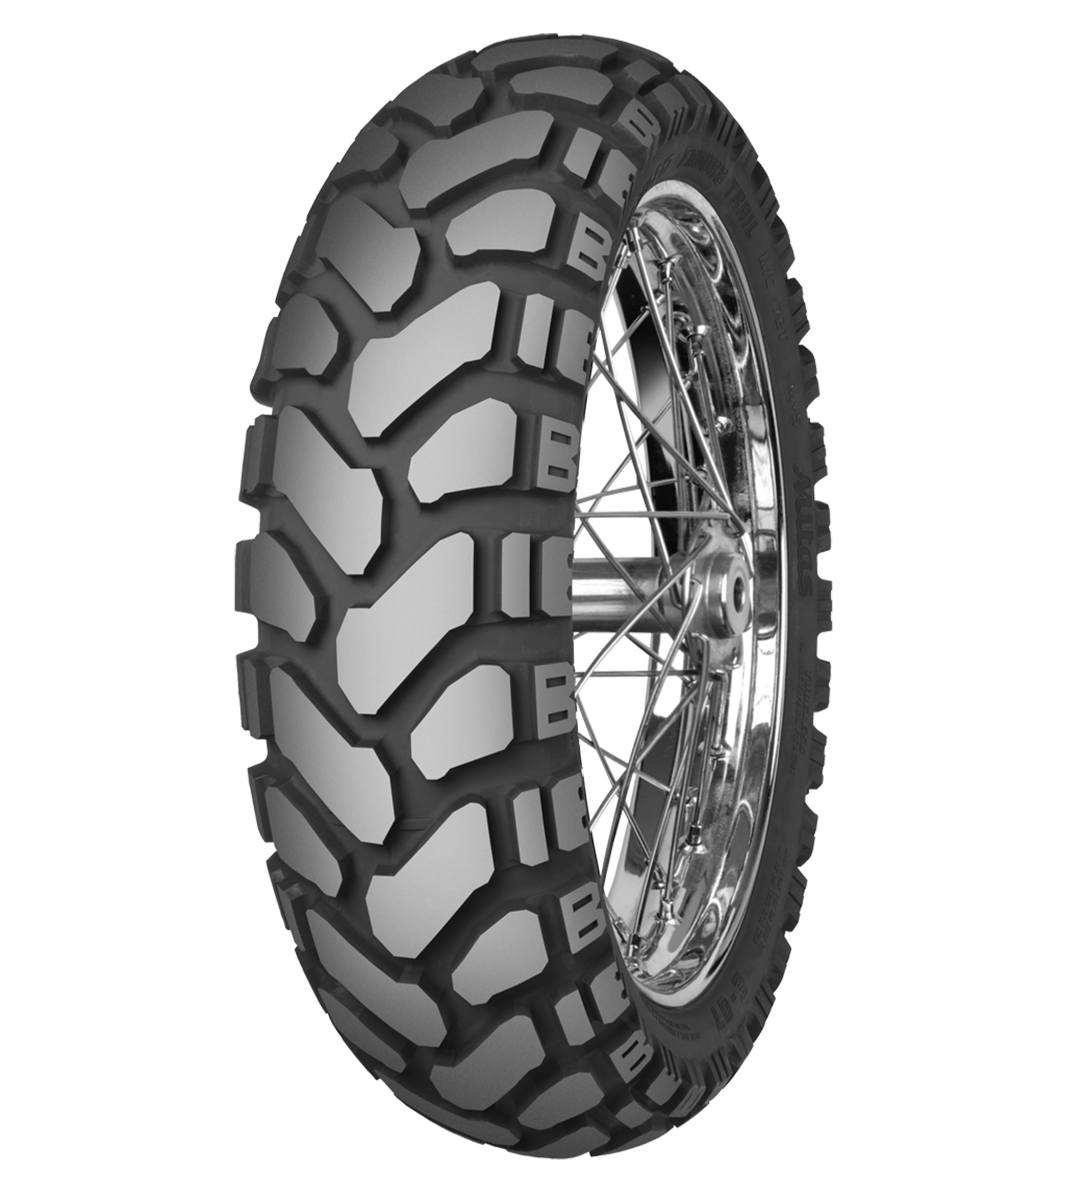 Mitas E-07+ ENDURO TRAIL 170/60B17 Trail ON Trail 72T No Stripe Tubeless Rear Tire, 224031, 170/60B17, Adventure Touring, E Series, E-07+ Enduro Trail, Rear, Trail, Trail ON, Tires - Imported and distributed in North & South America by Lindeco Genuine Powersports - Premier Powersports Equipment and Accessories for Motorcycle Enthusiasts, Professional Riders and Dealers.